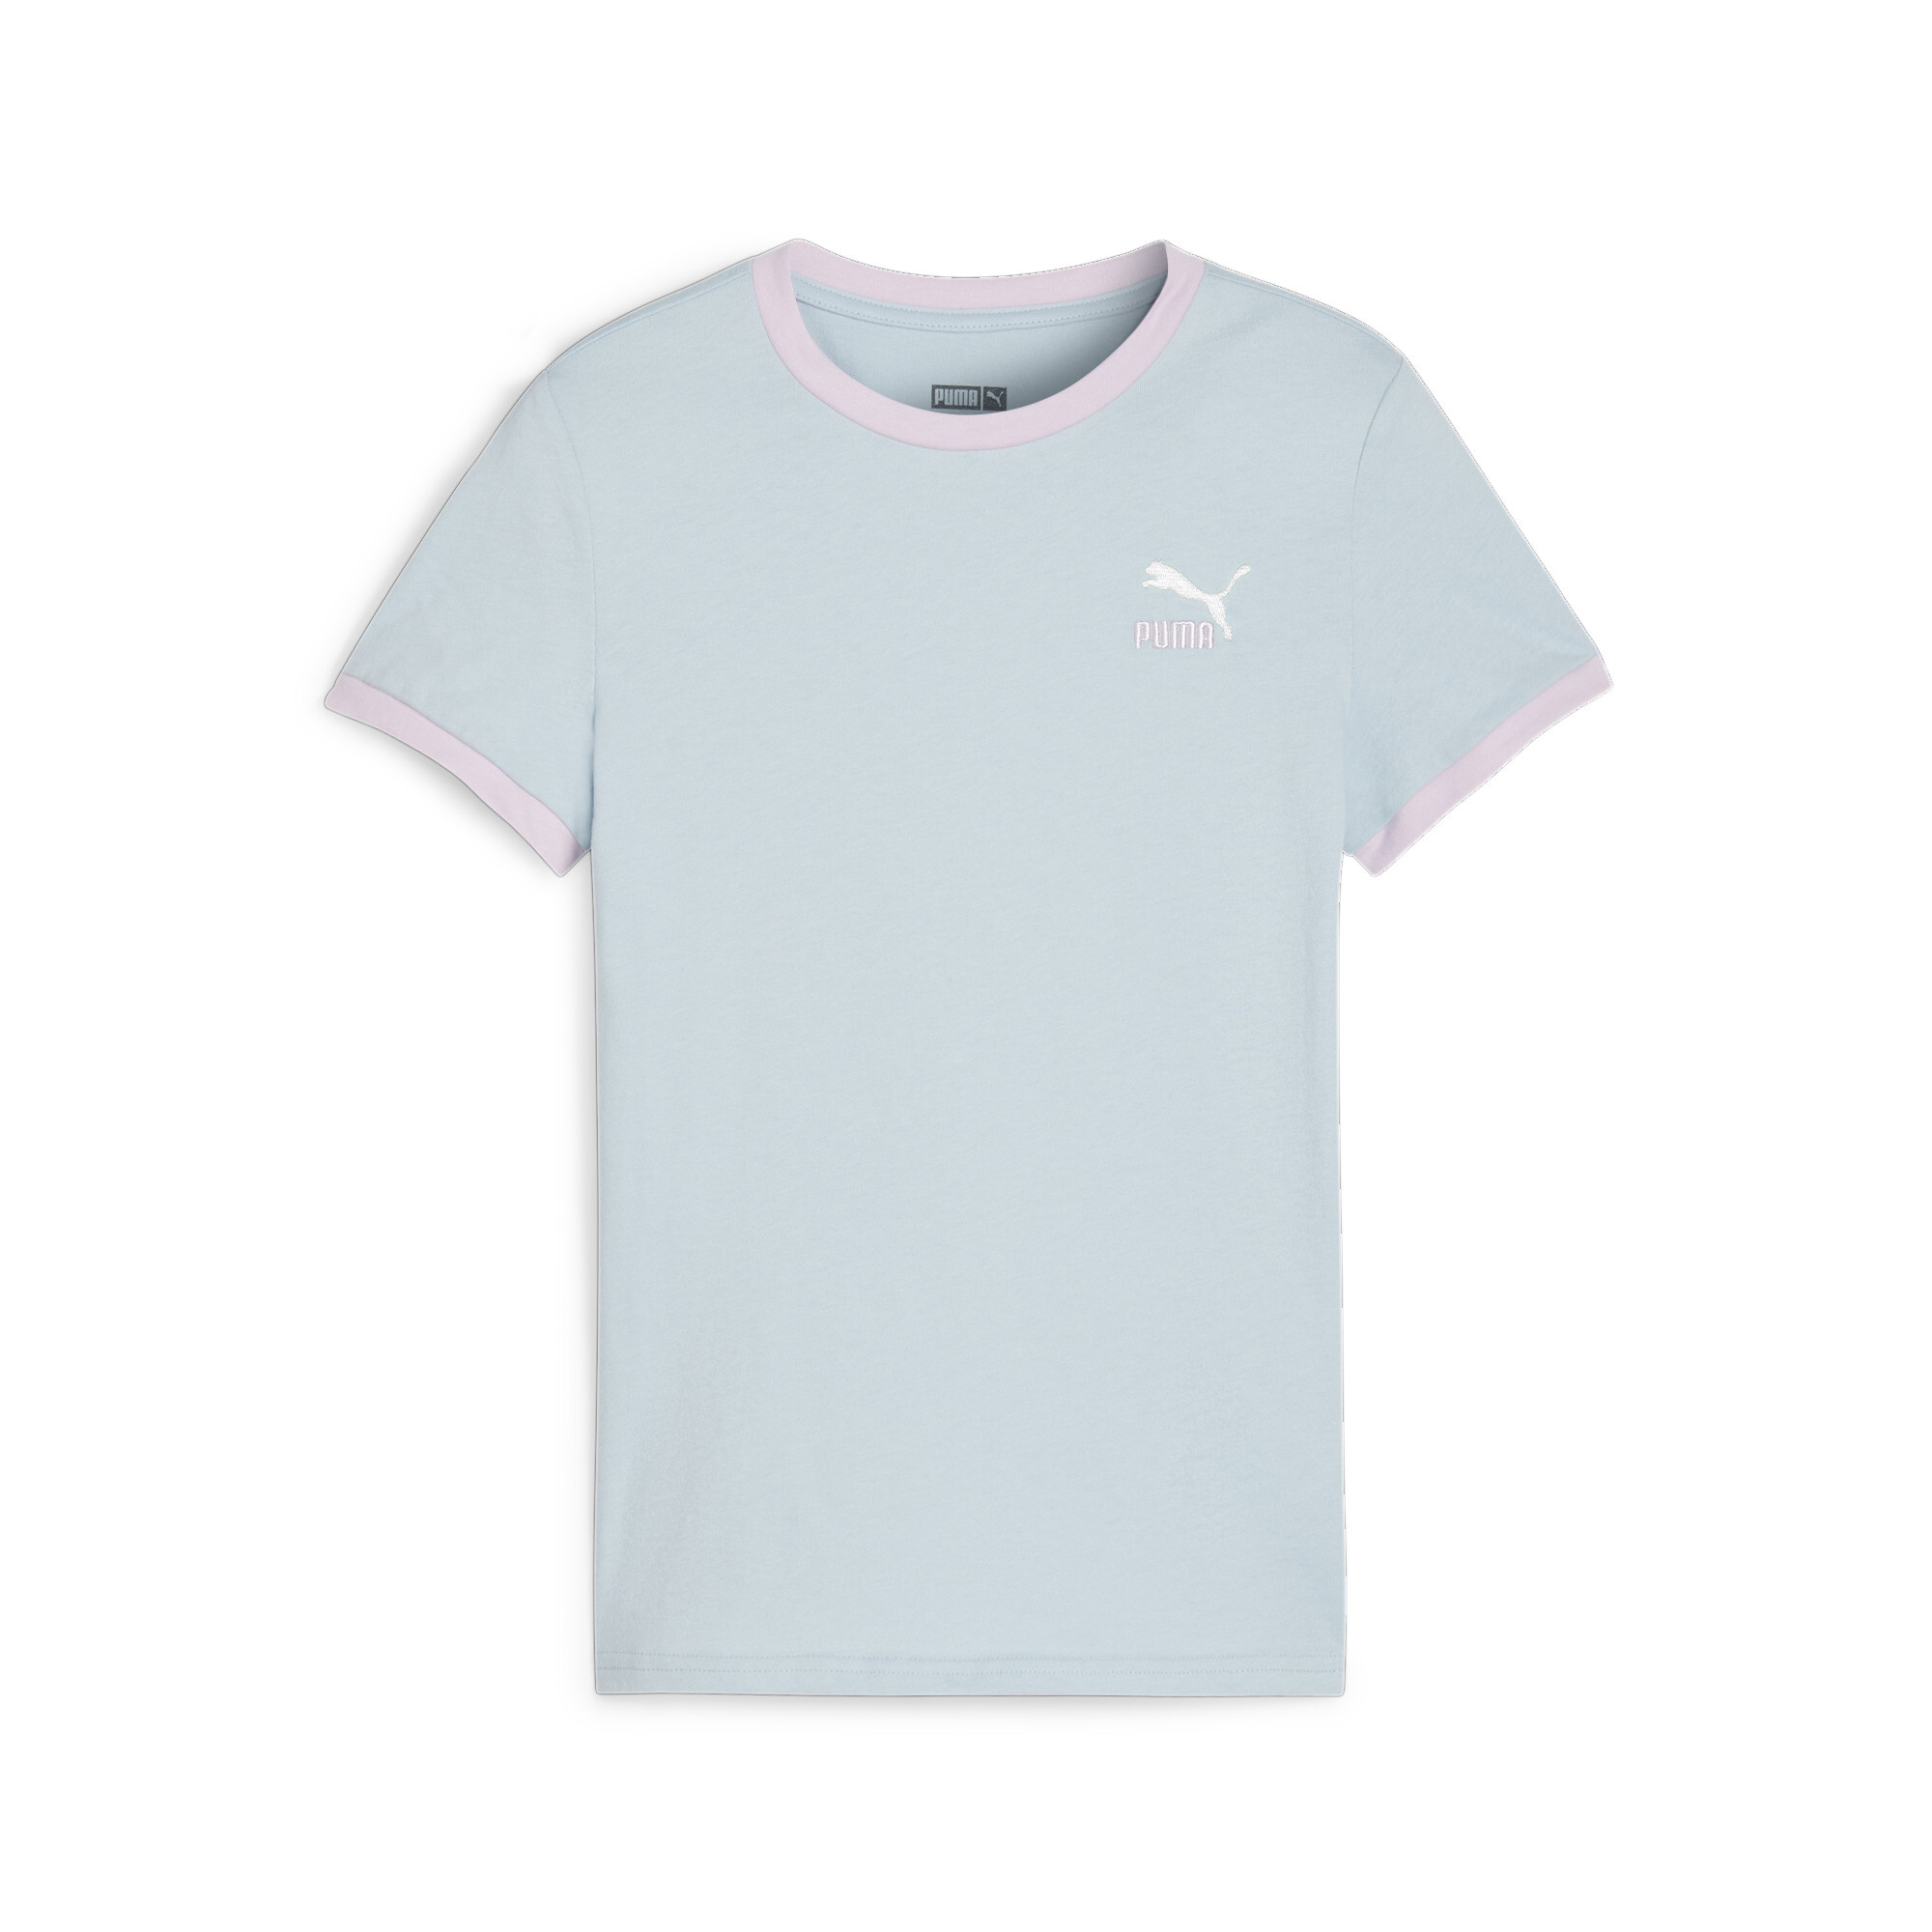 PUMA CLASSICS Match Point T-Shirt In Blue, Size 11-12 Youth